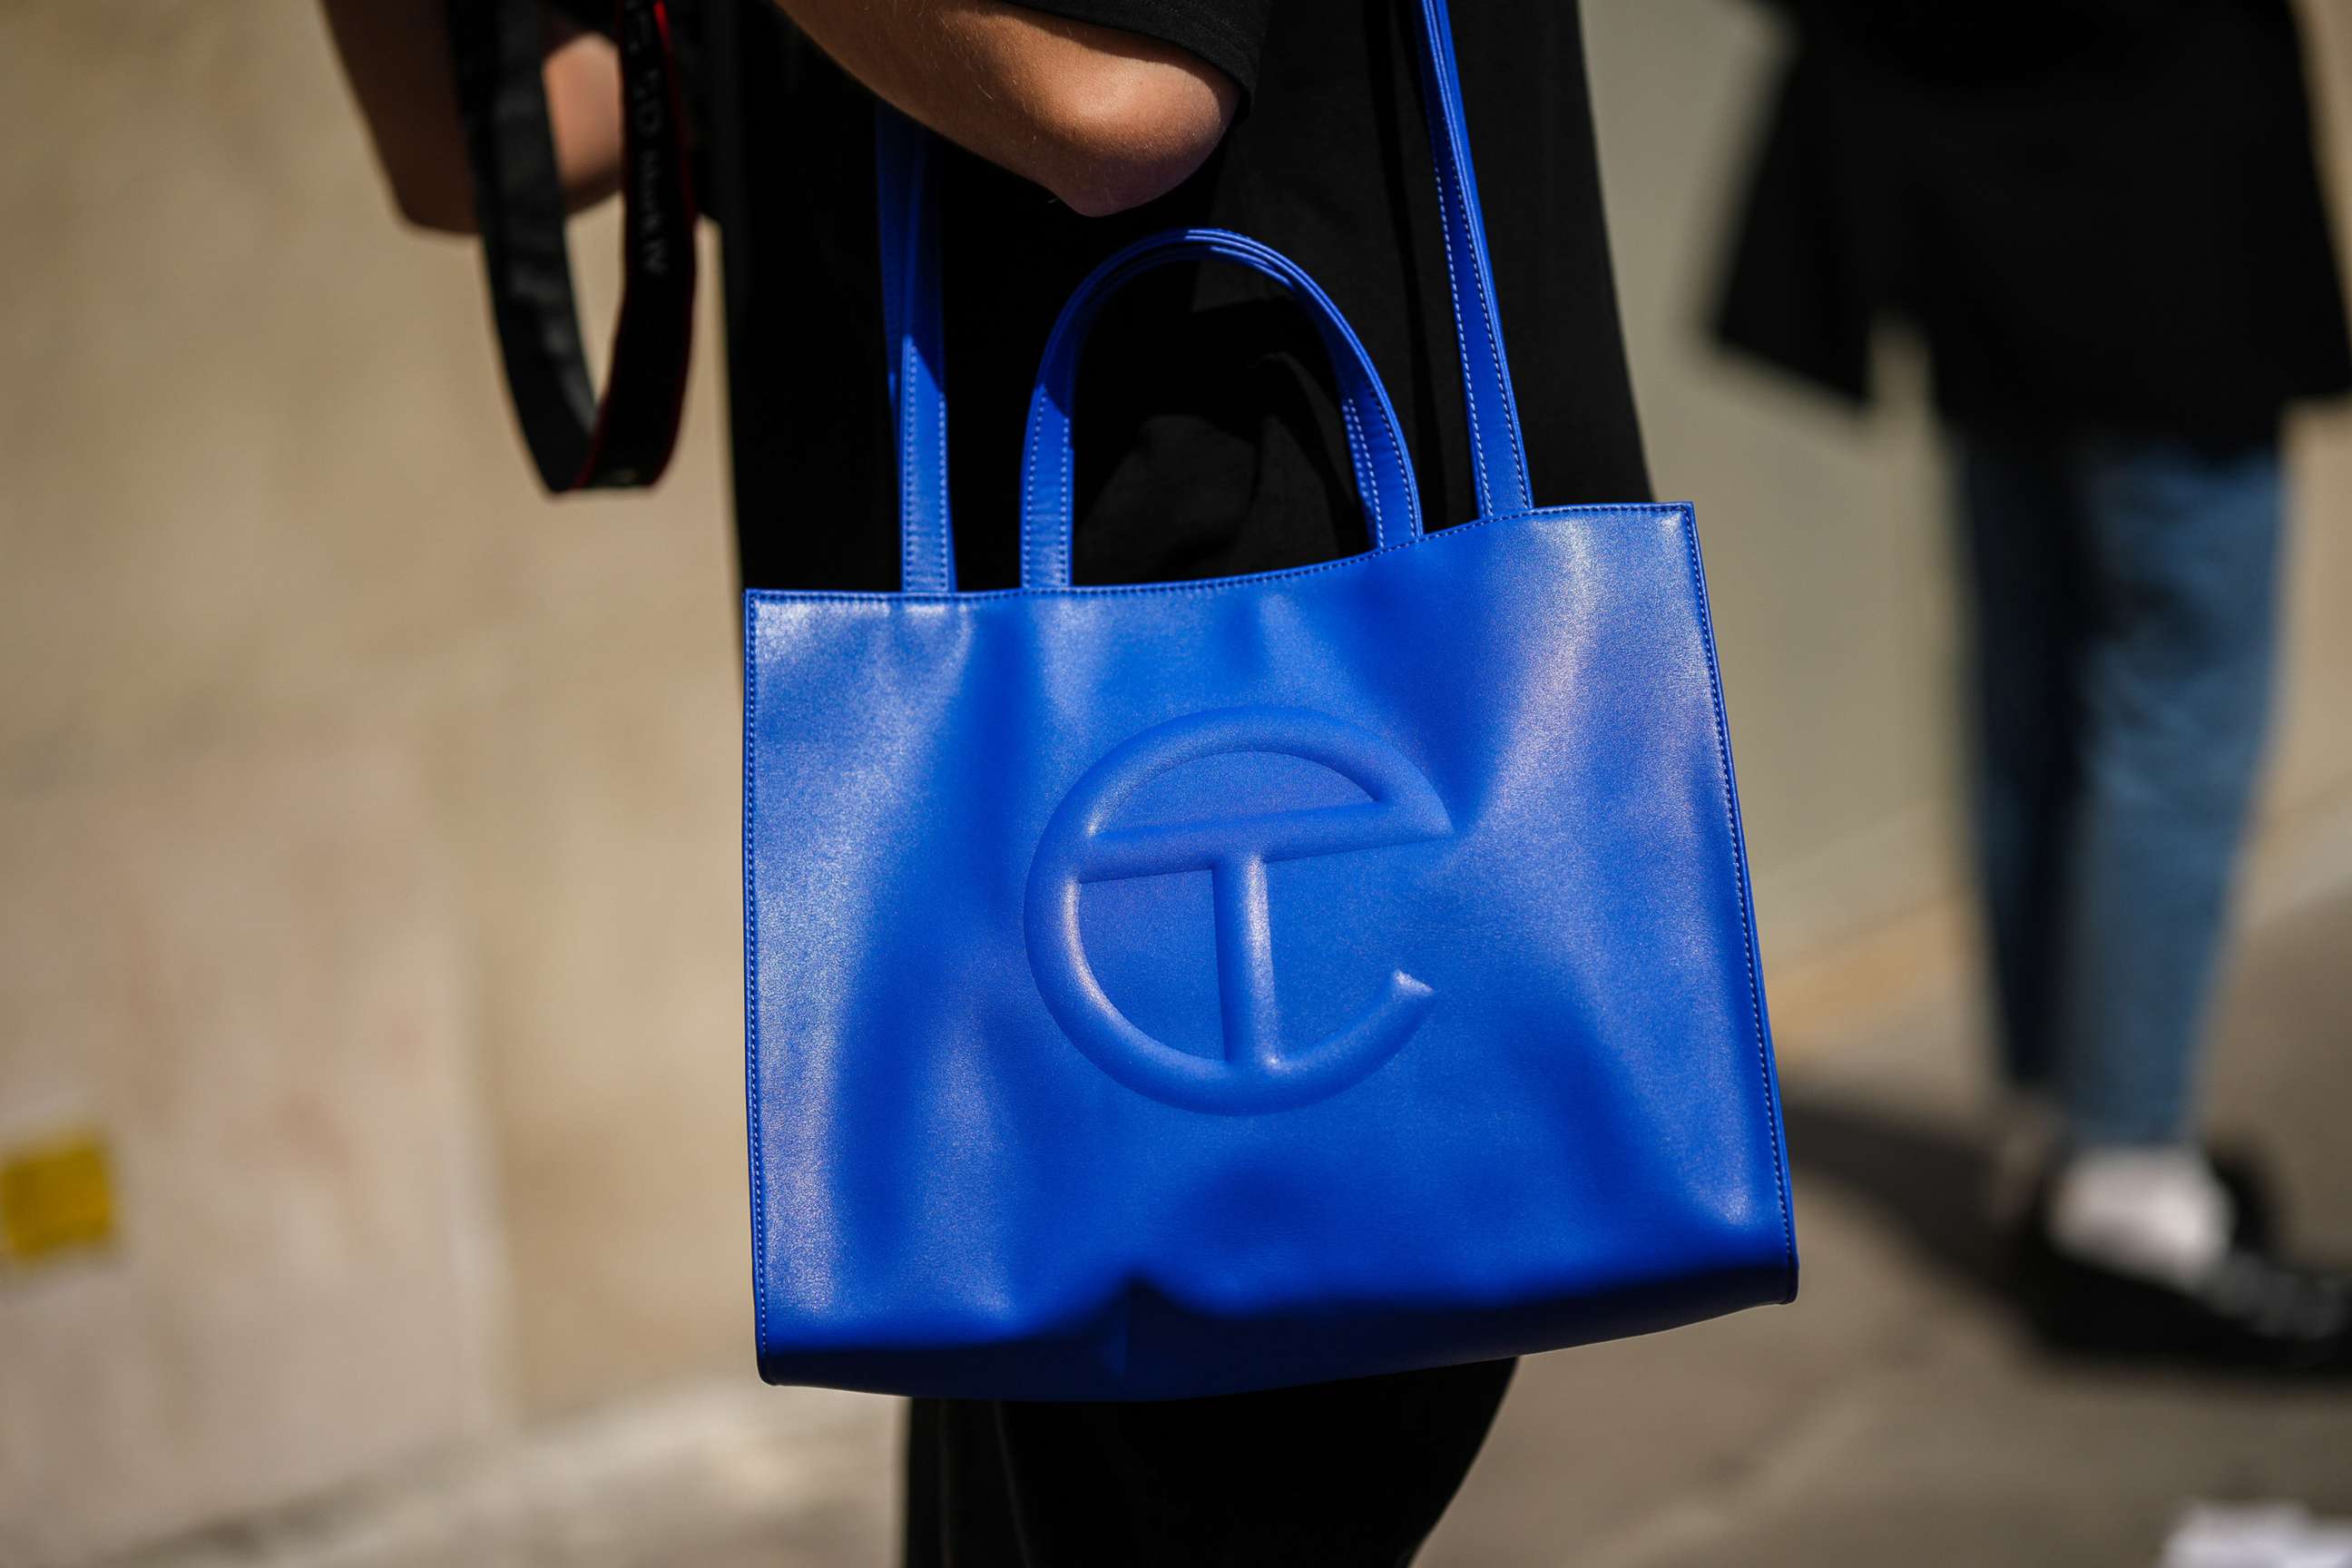 Telfar bags take over Brooklyn at Rainbow pop-up shop during New